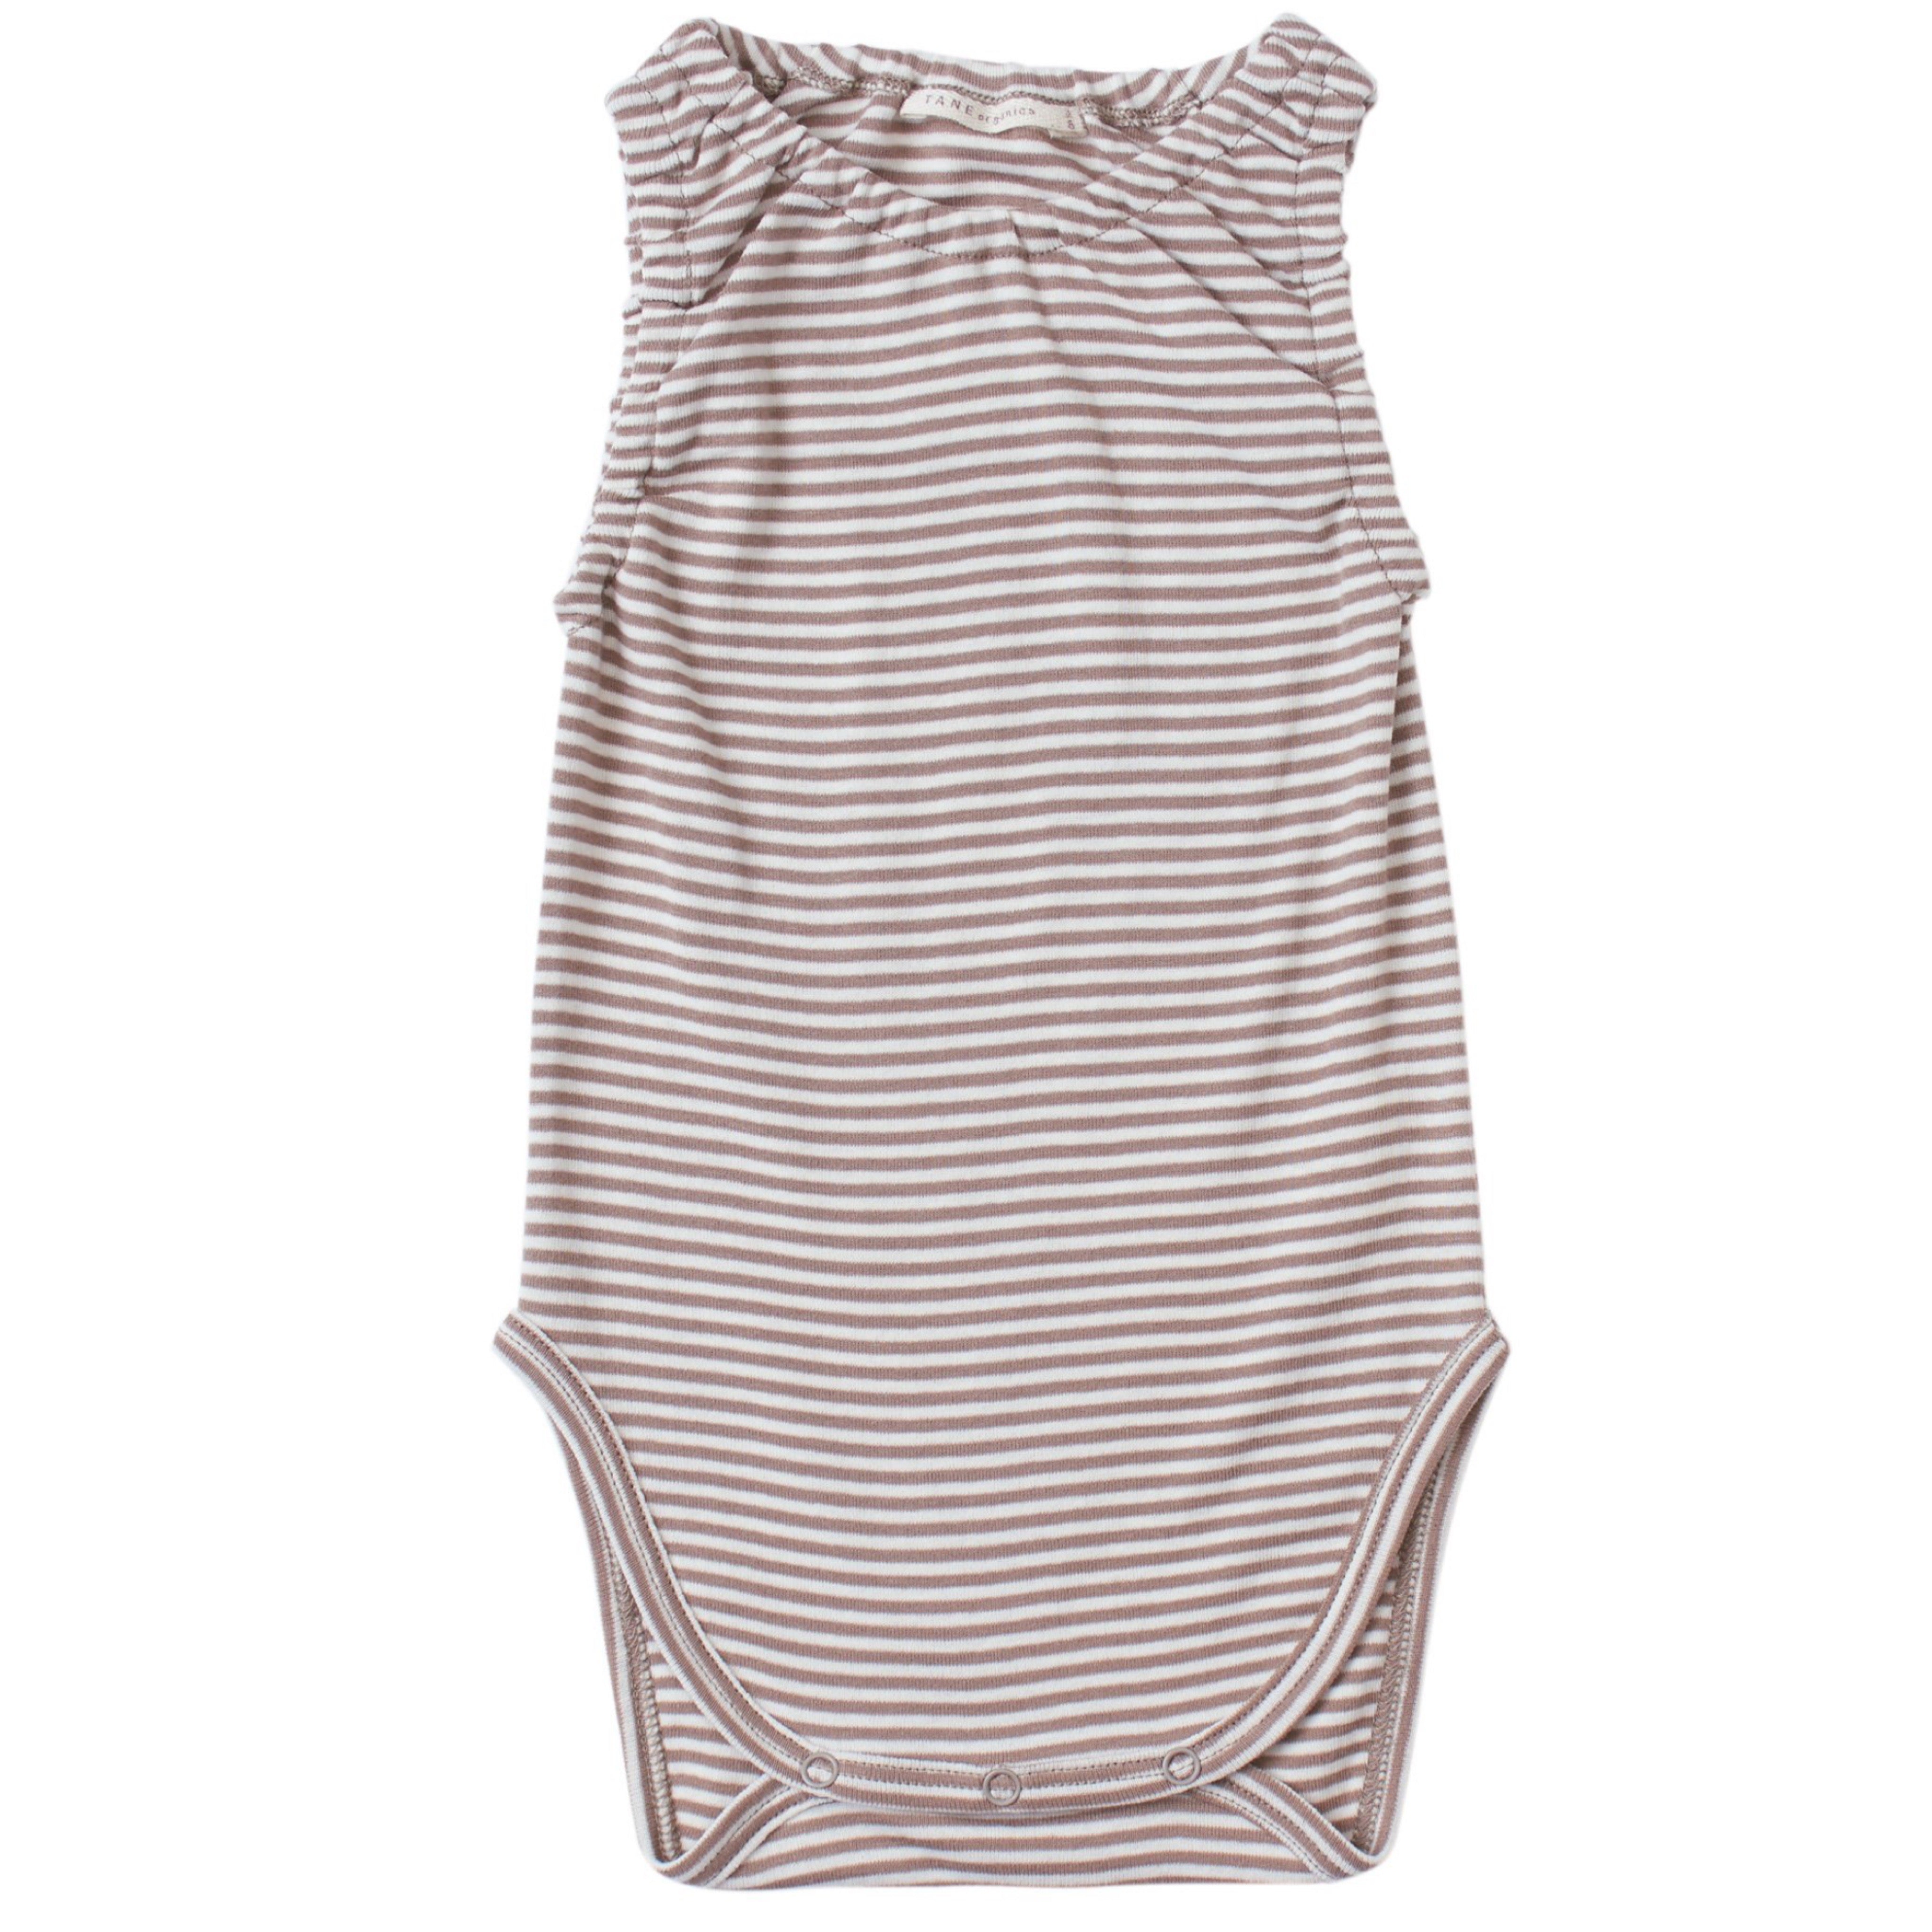 brown and cream color petite stripes on a sleeveless crewneck onesie with soft encased elastics at neck and armhole trim. 100% organic cotton petite stripe knit.